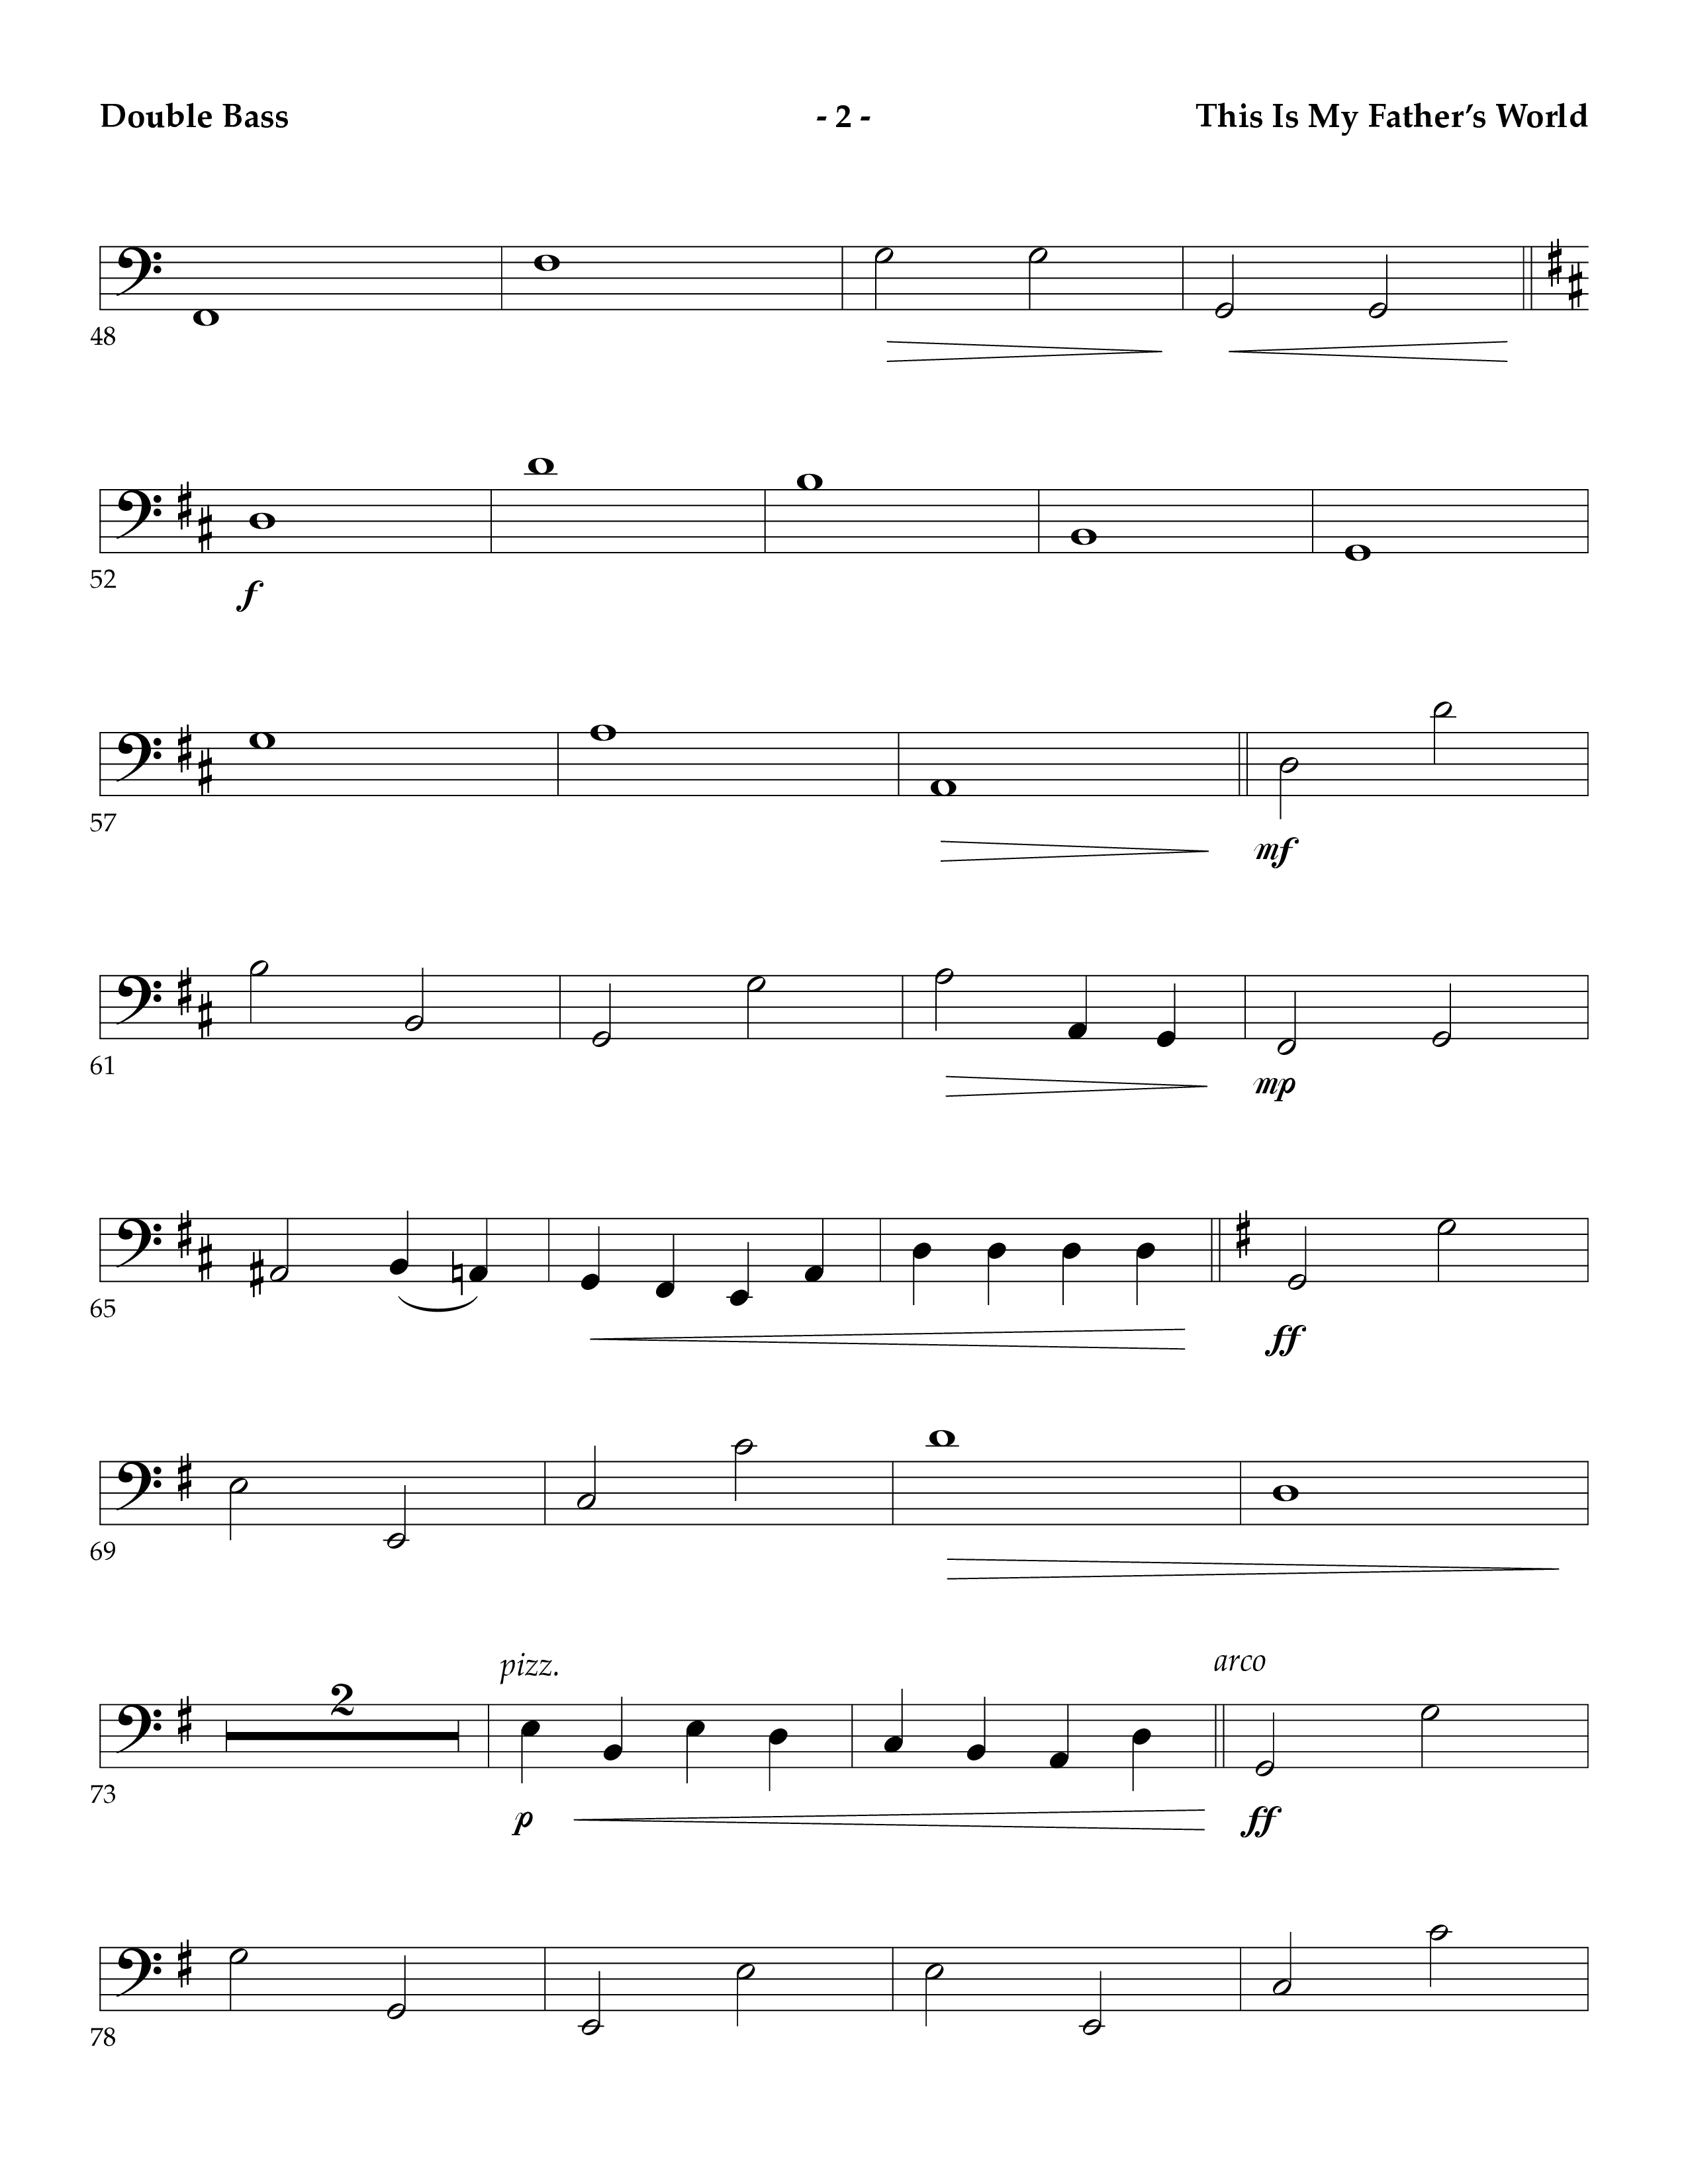 This Is My Father's World (Instrumental) Double Bass (Lifeway Worship / Arr. Mark Johnson)